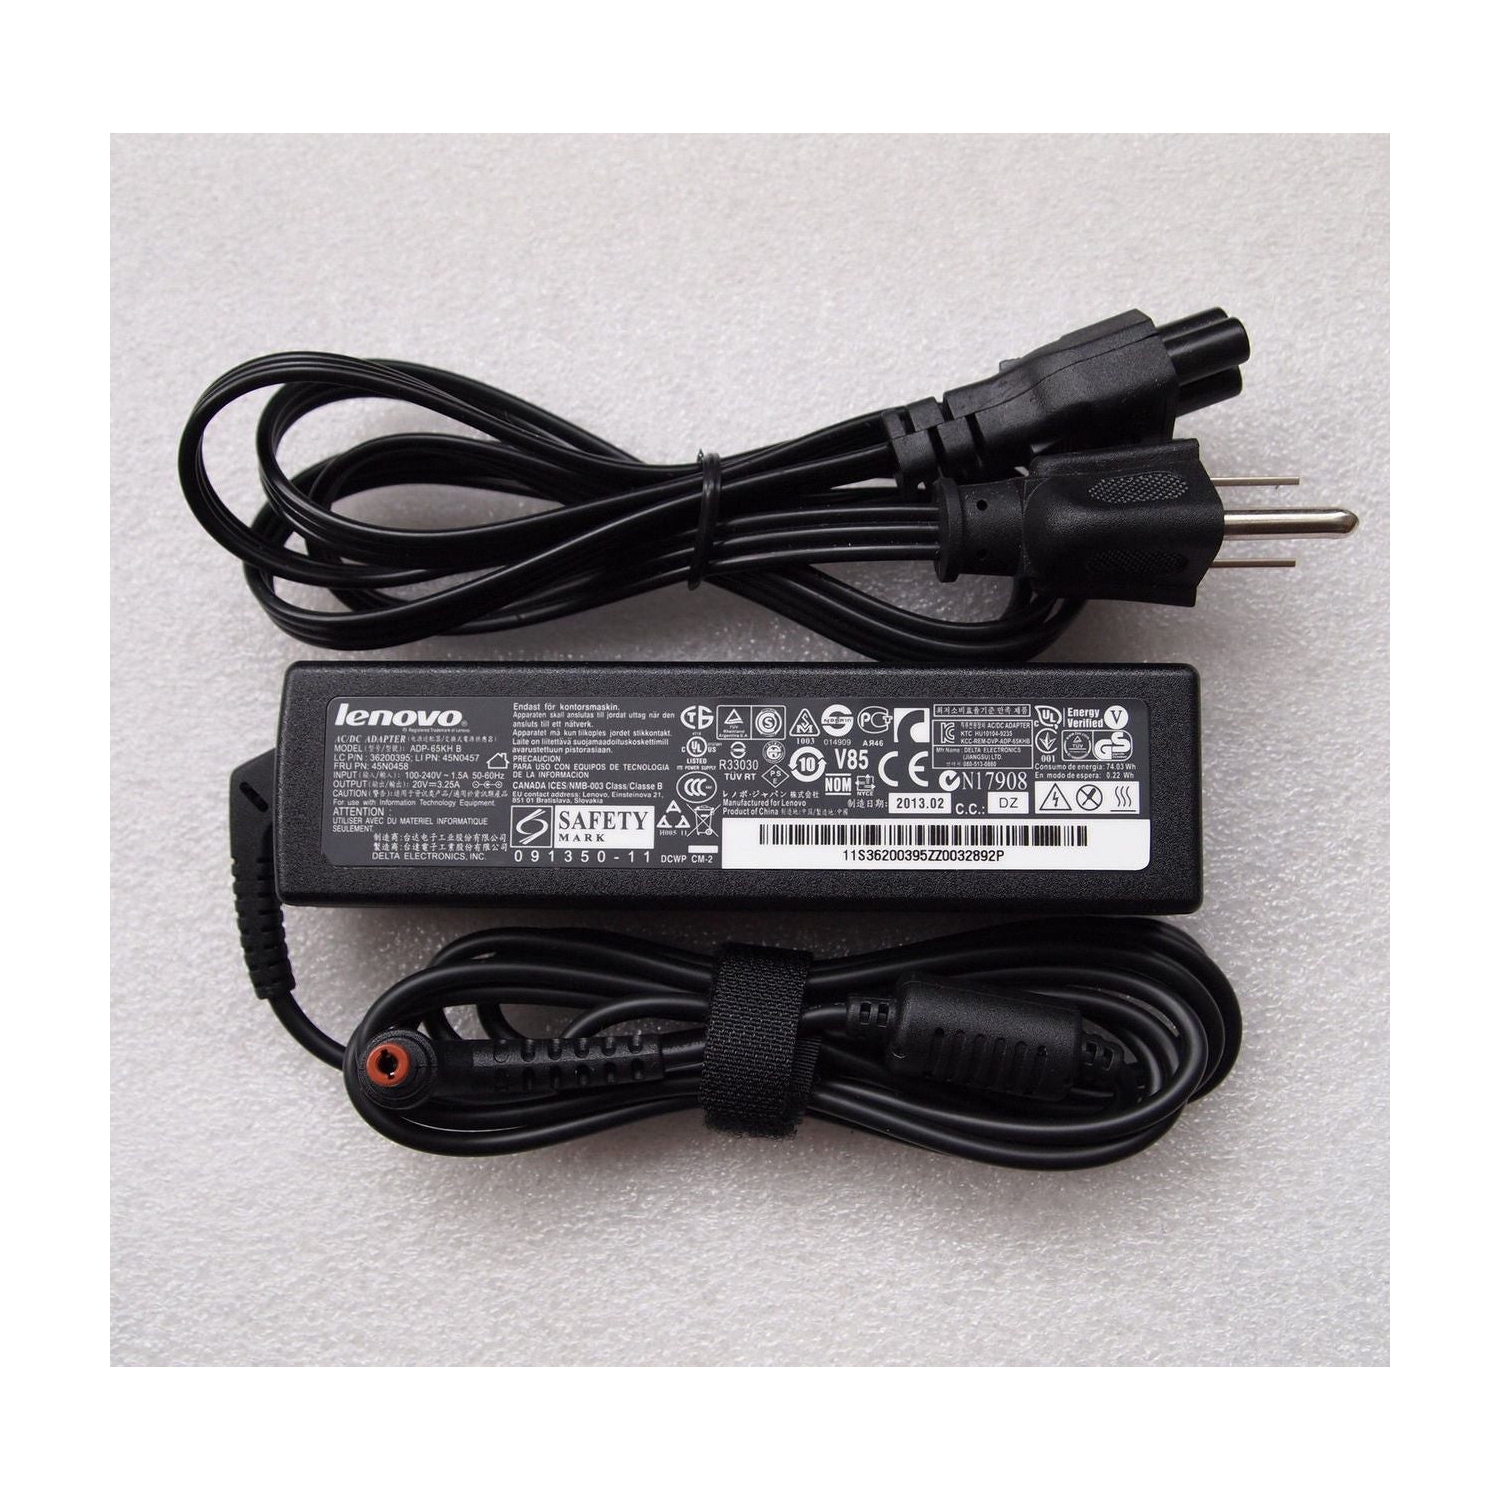 New Genuine Lenovo Ideapad U300E U330 U350 U350W V360 V460 Y350 Y550 Y550A Y550G Y550P AC Power Adapter Charger 65W